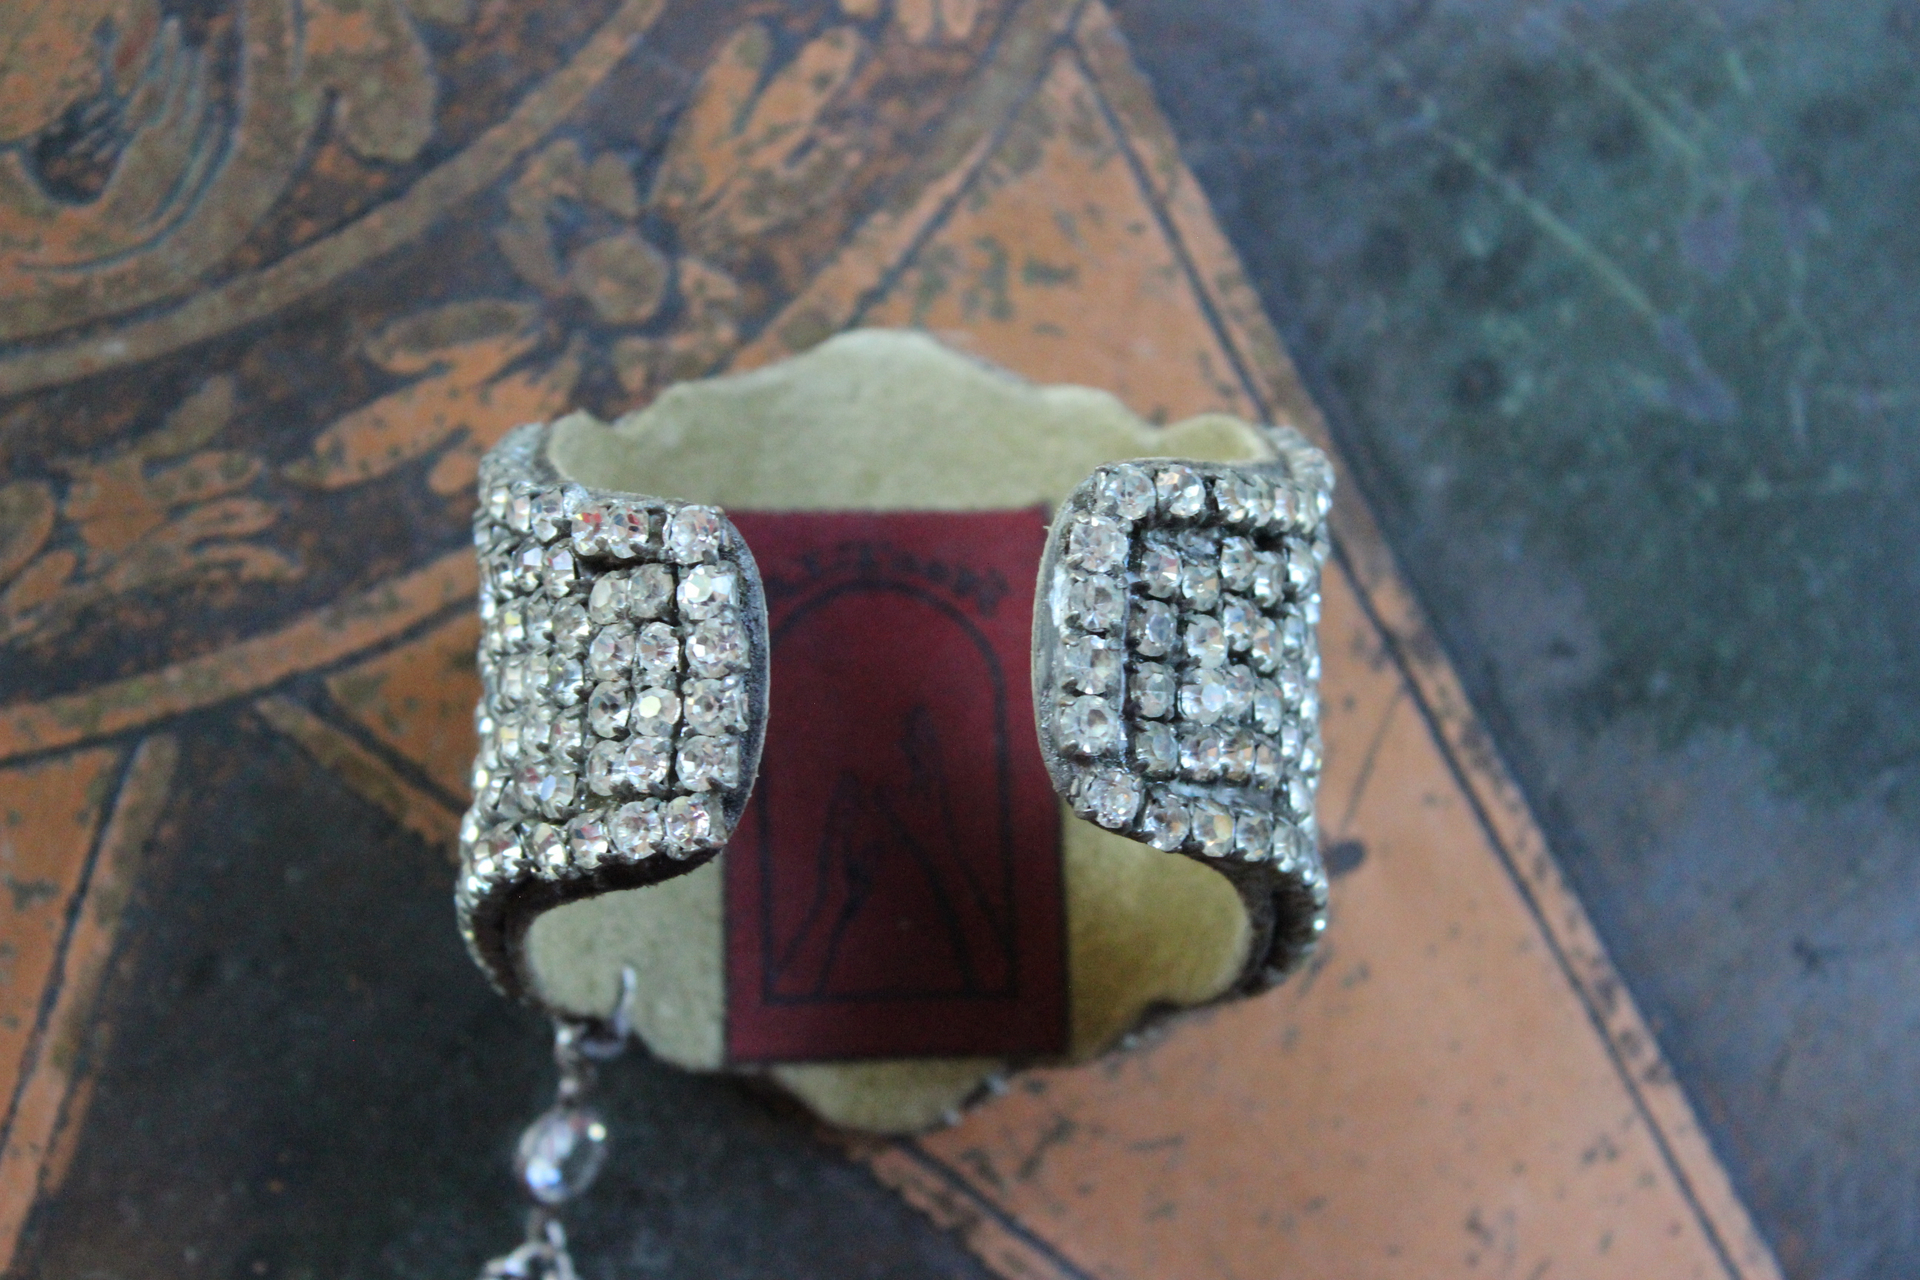 Antique Faceted Rhinestone Cuff Bracelet with Rare Antique French Ave Maria Medal, Antique Sterling Bead Point Cross, Antique Sterling Reliquary Locket & More!